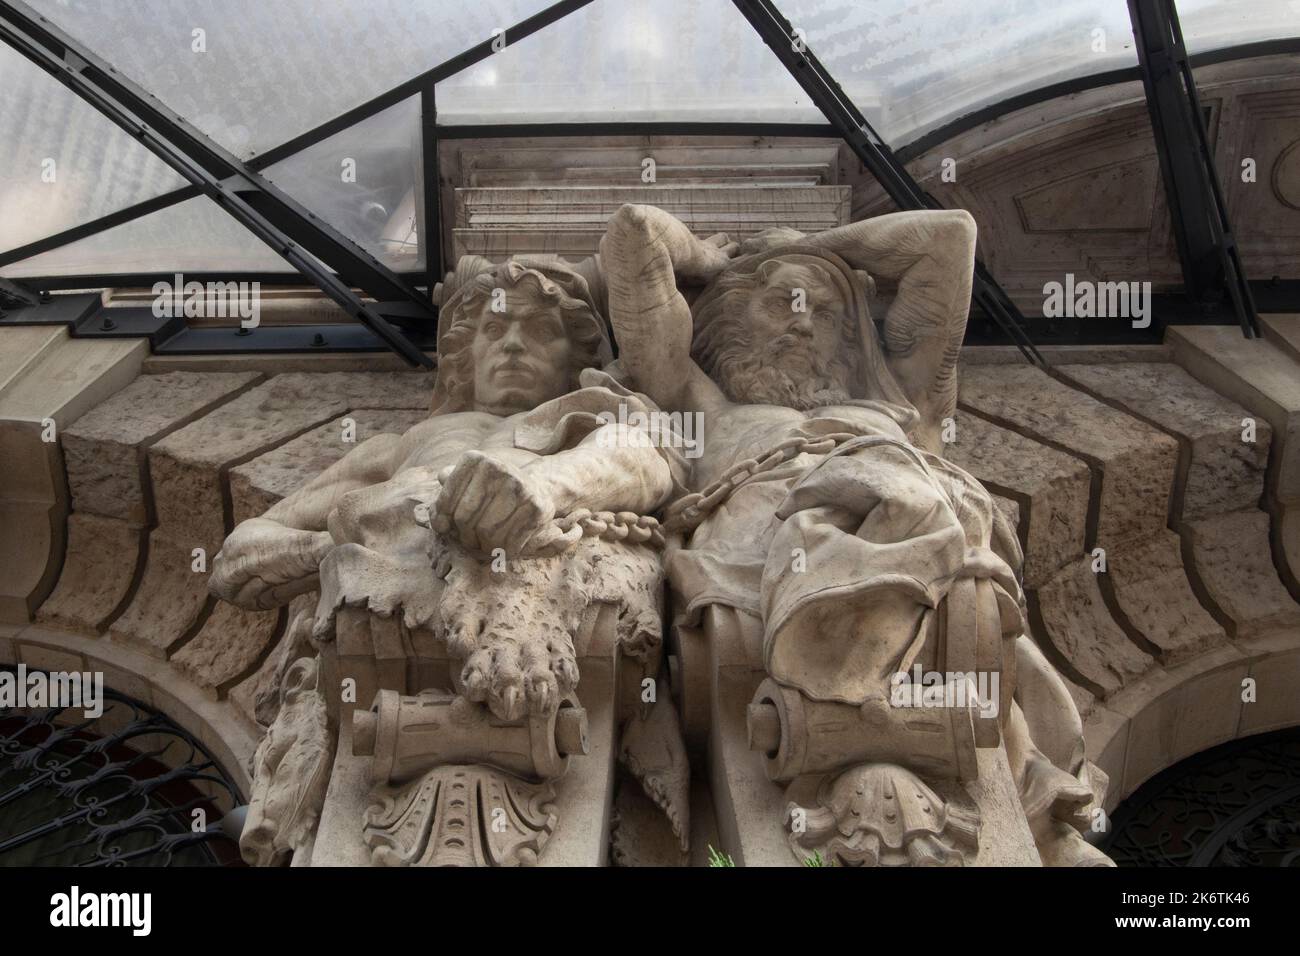 Statues at the entrance to the New York Café Erzsébet krt Budapest Hungary Stock Photo